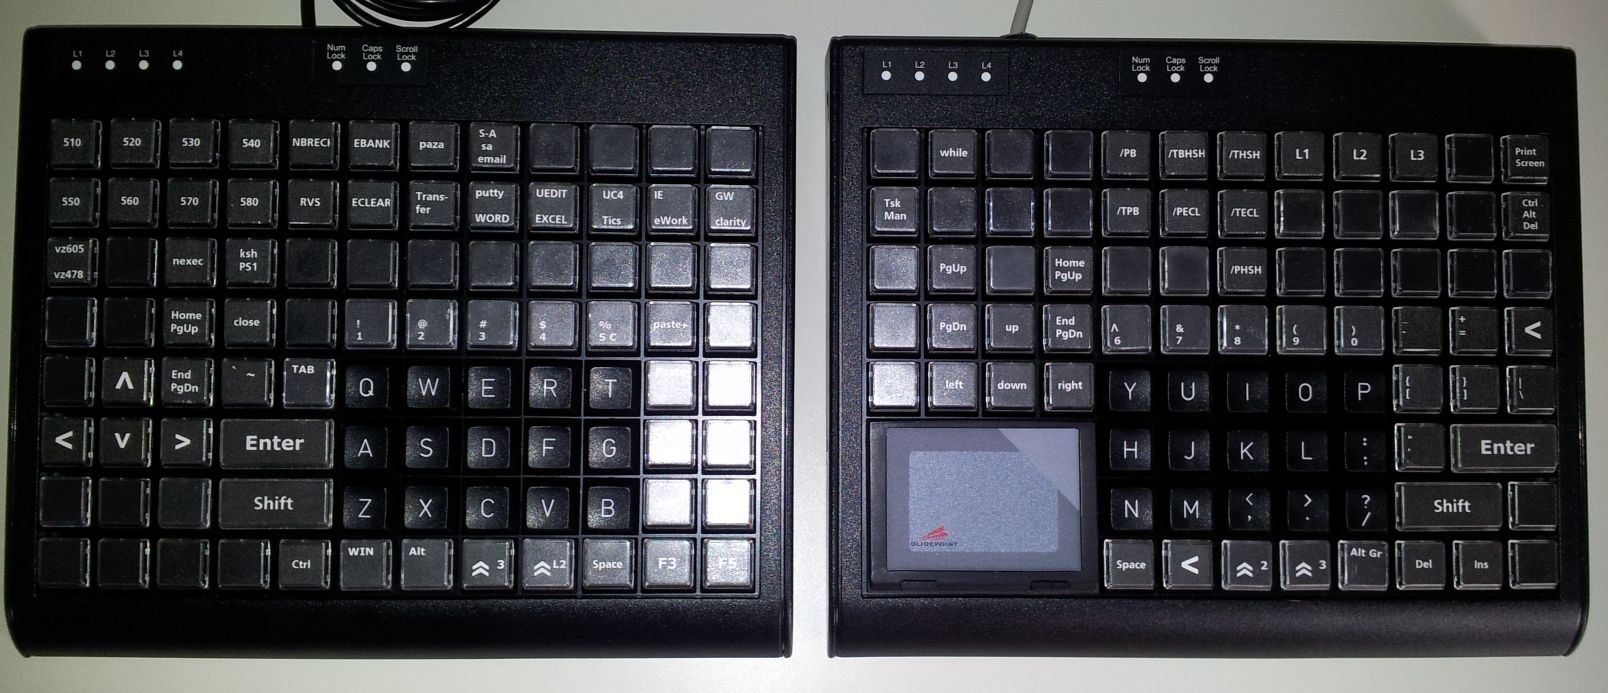 double 96 tipro touchpad black final.jpg